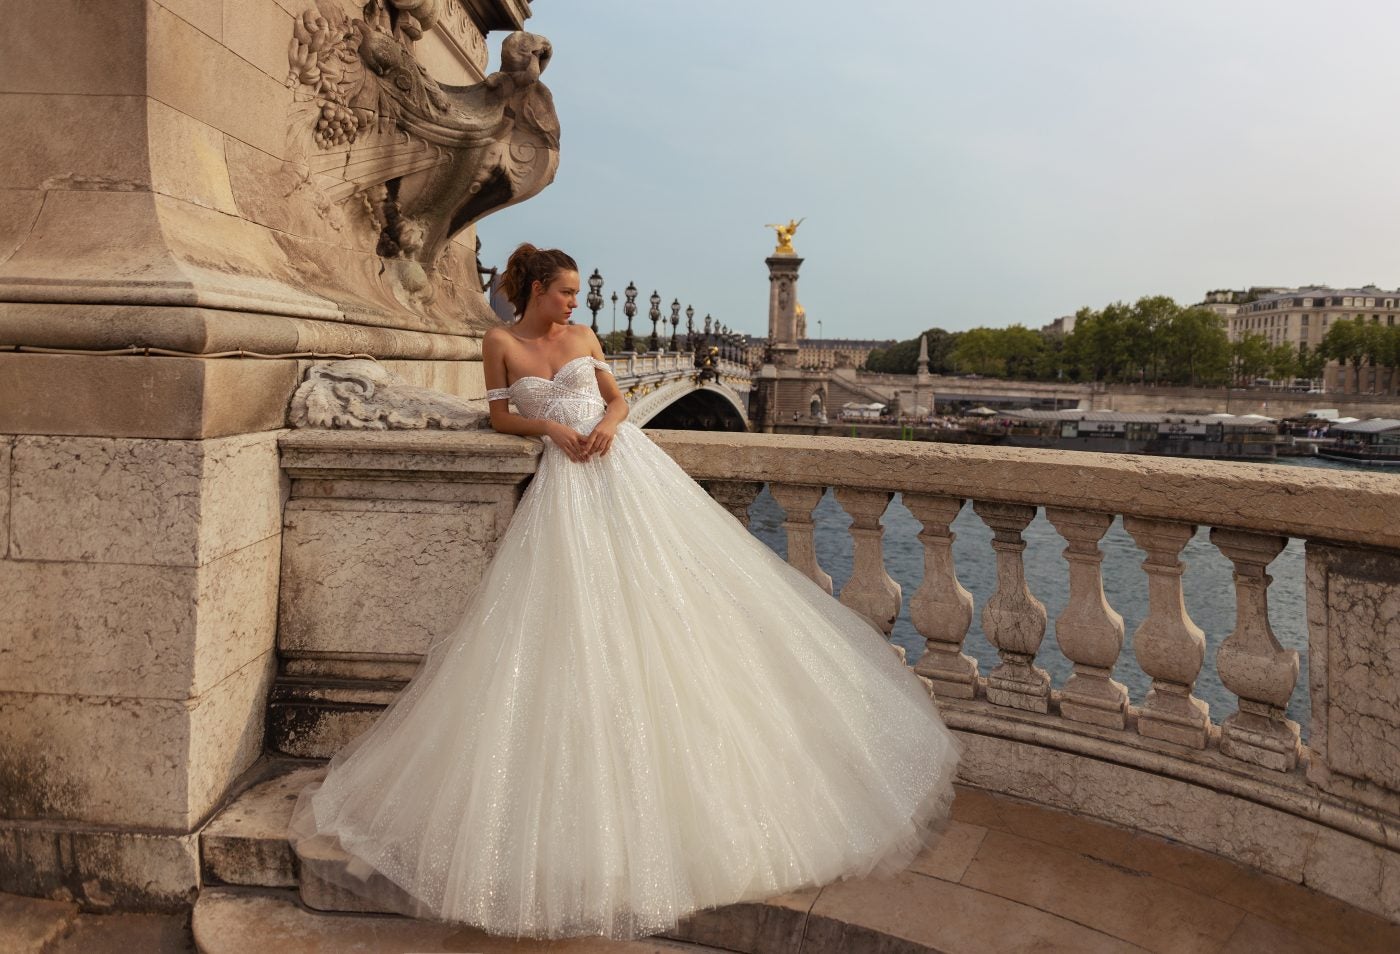 Beauty of the Bride – Wedding Gowns